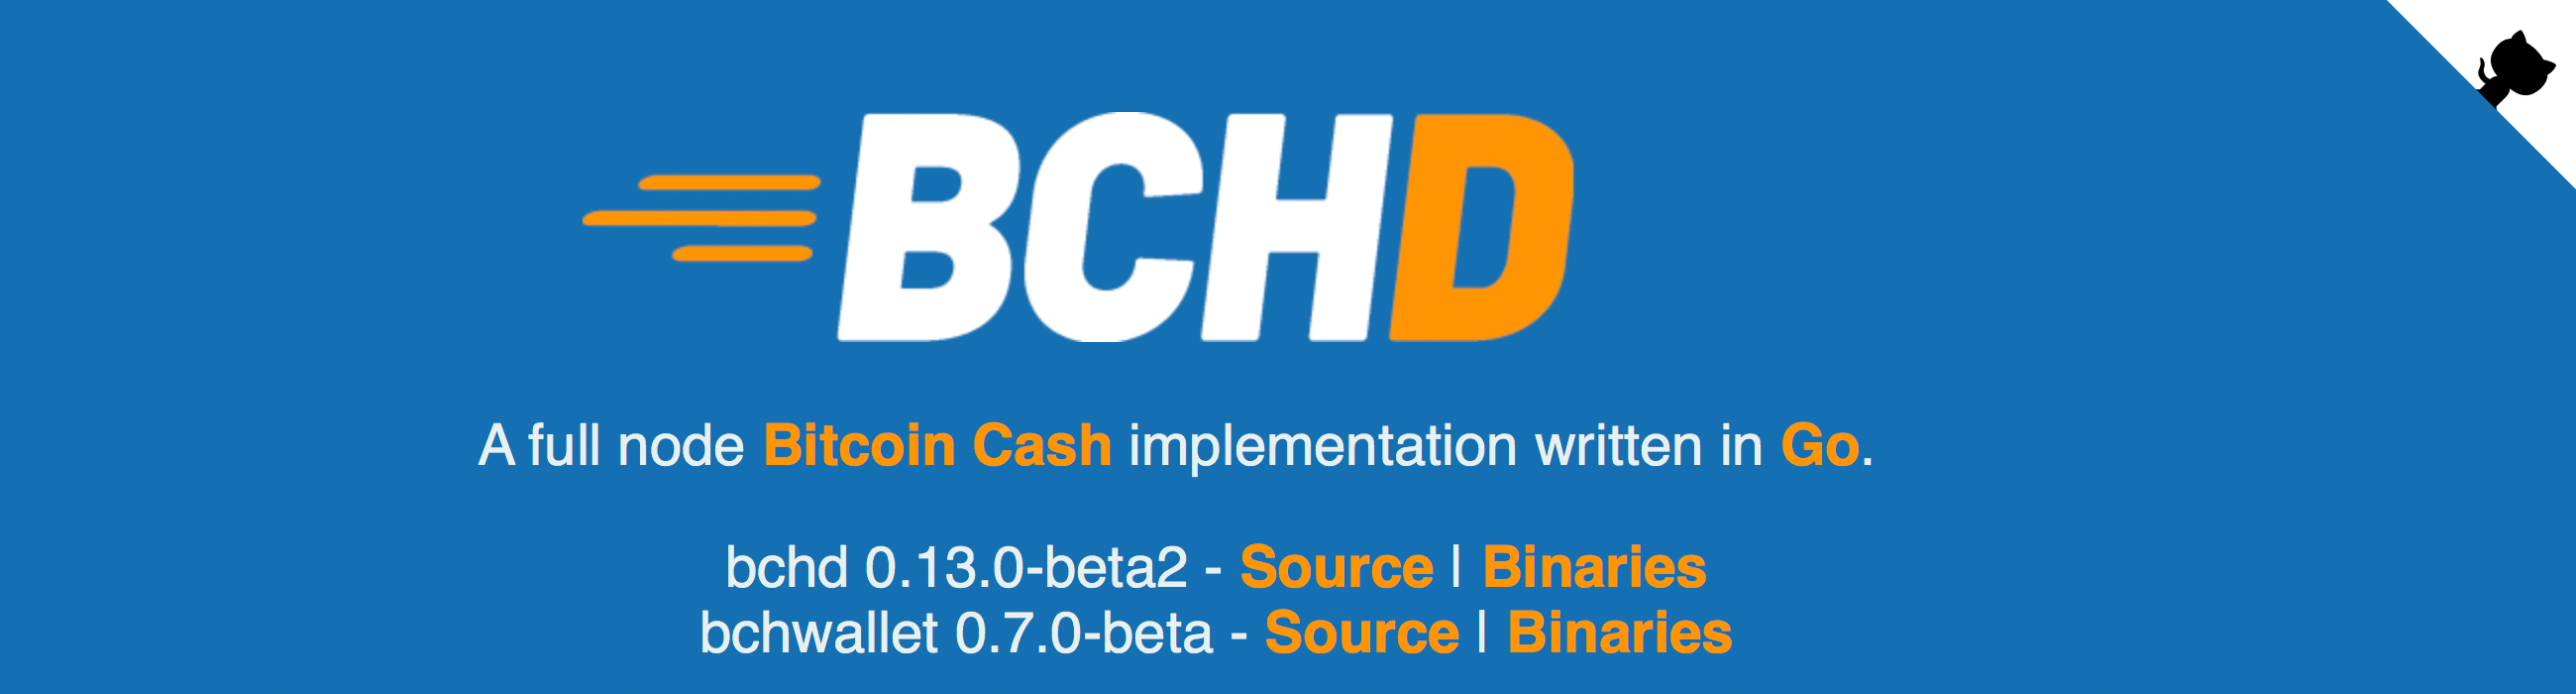 Bitcoin Cash Node Bchd Syncs in Just Over an Hour With Fast Mode